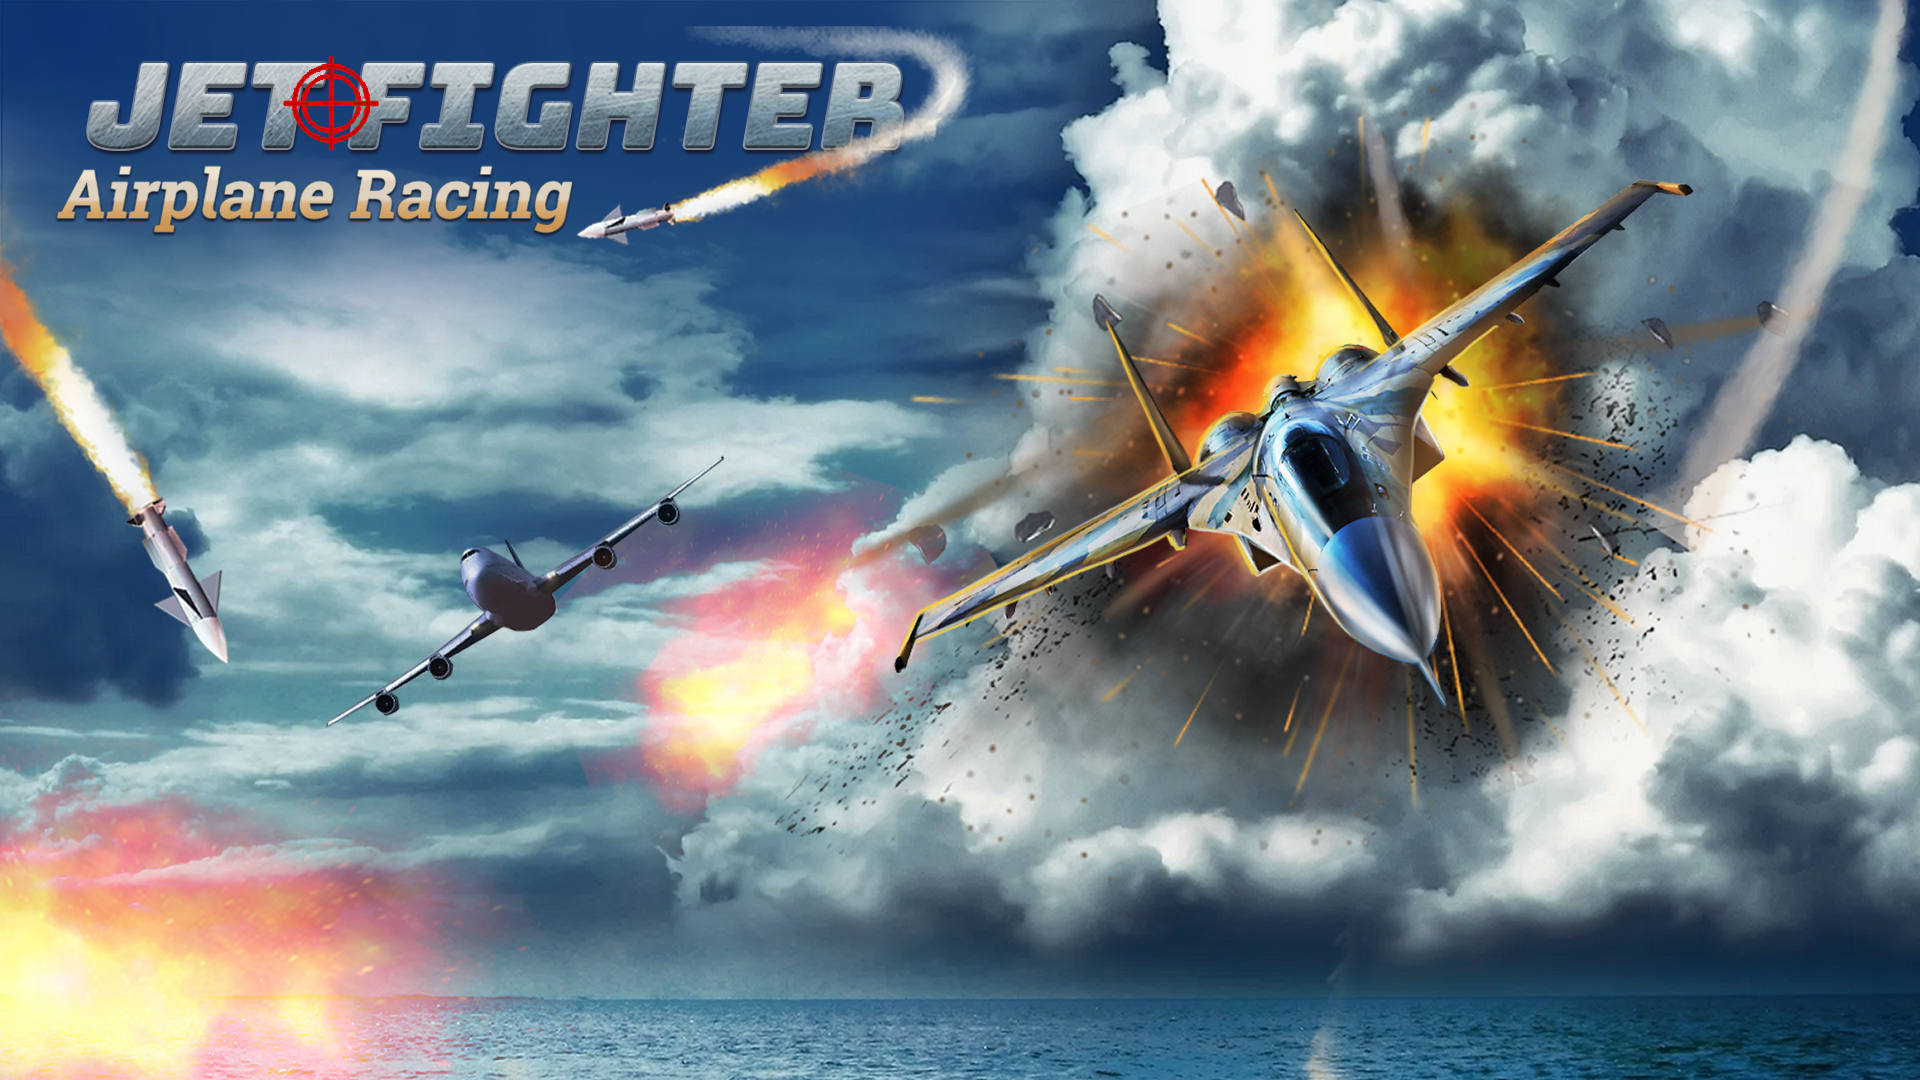 Jet Fighter Airplane Racing Game Image